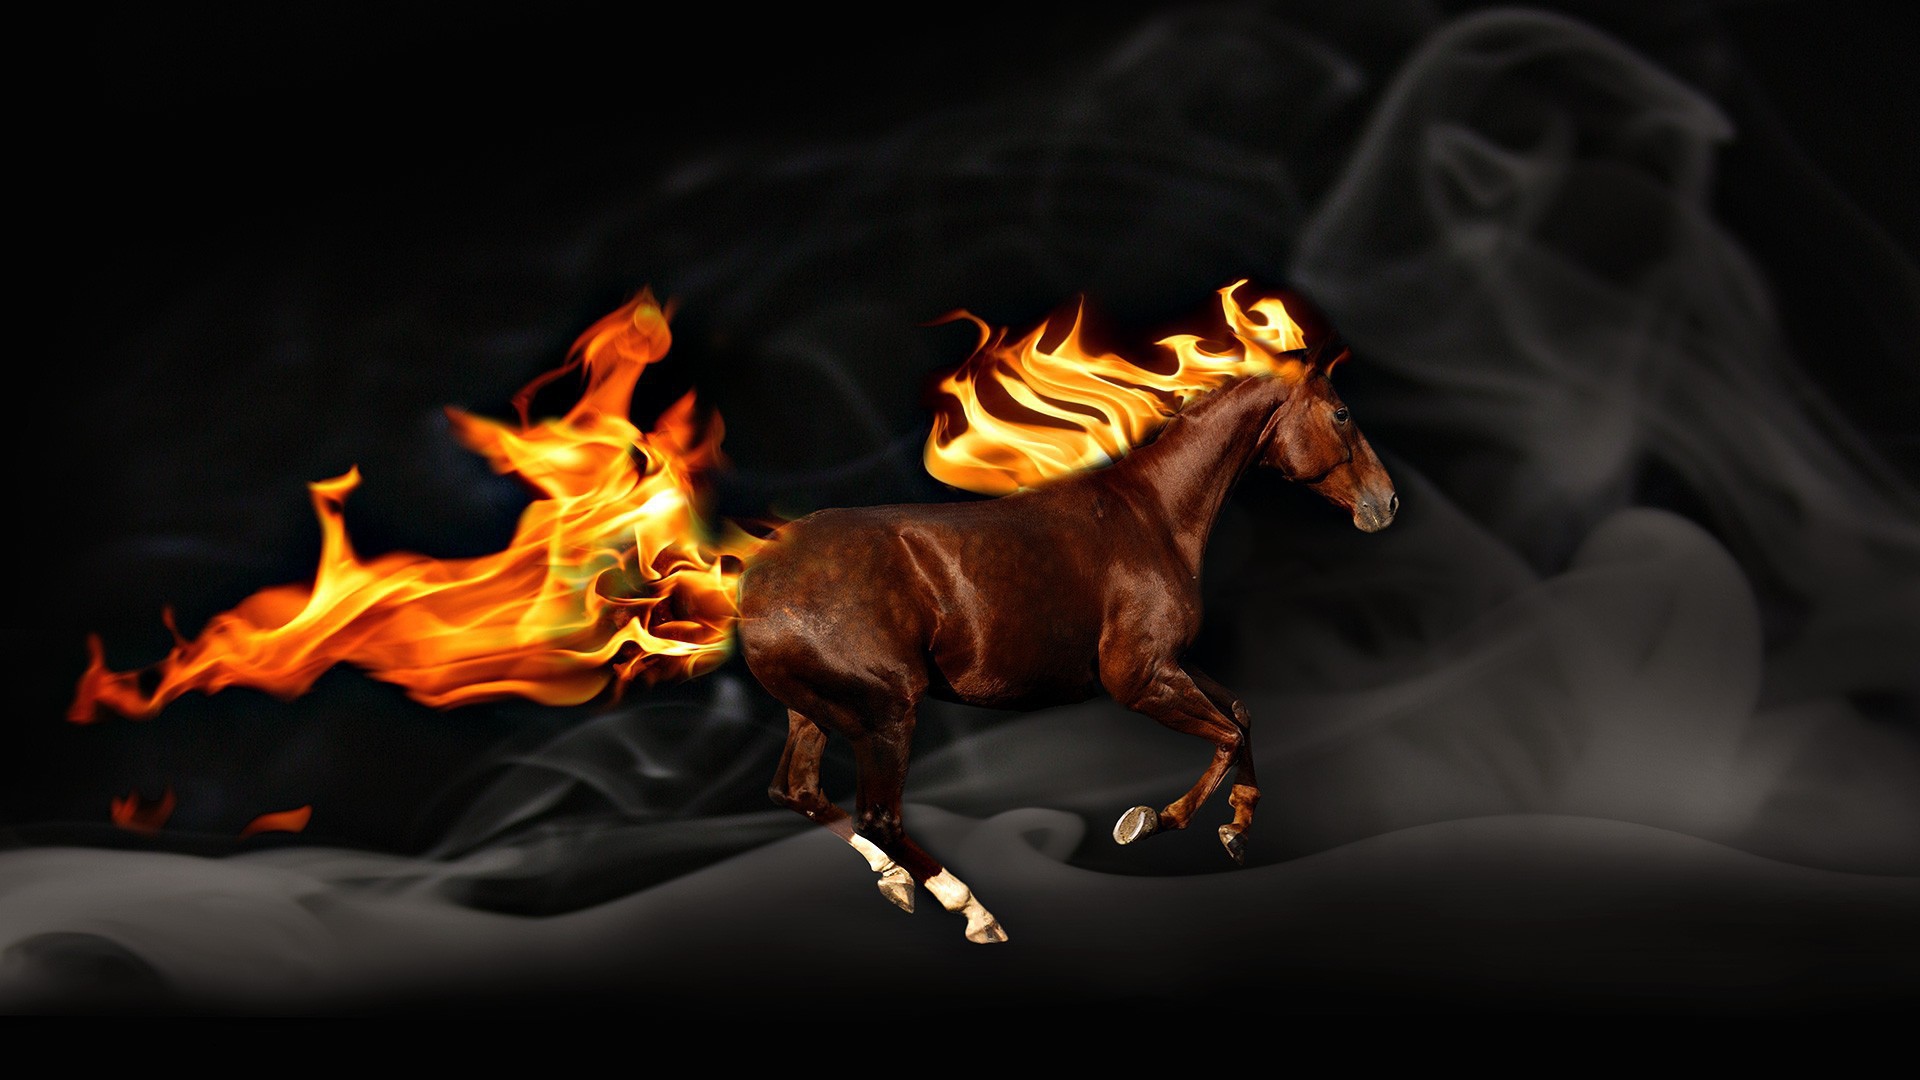 The horse with a fiery mane